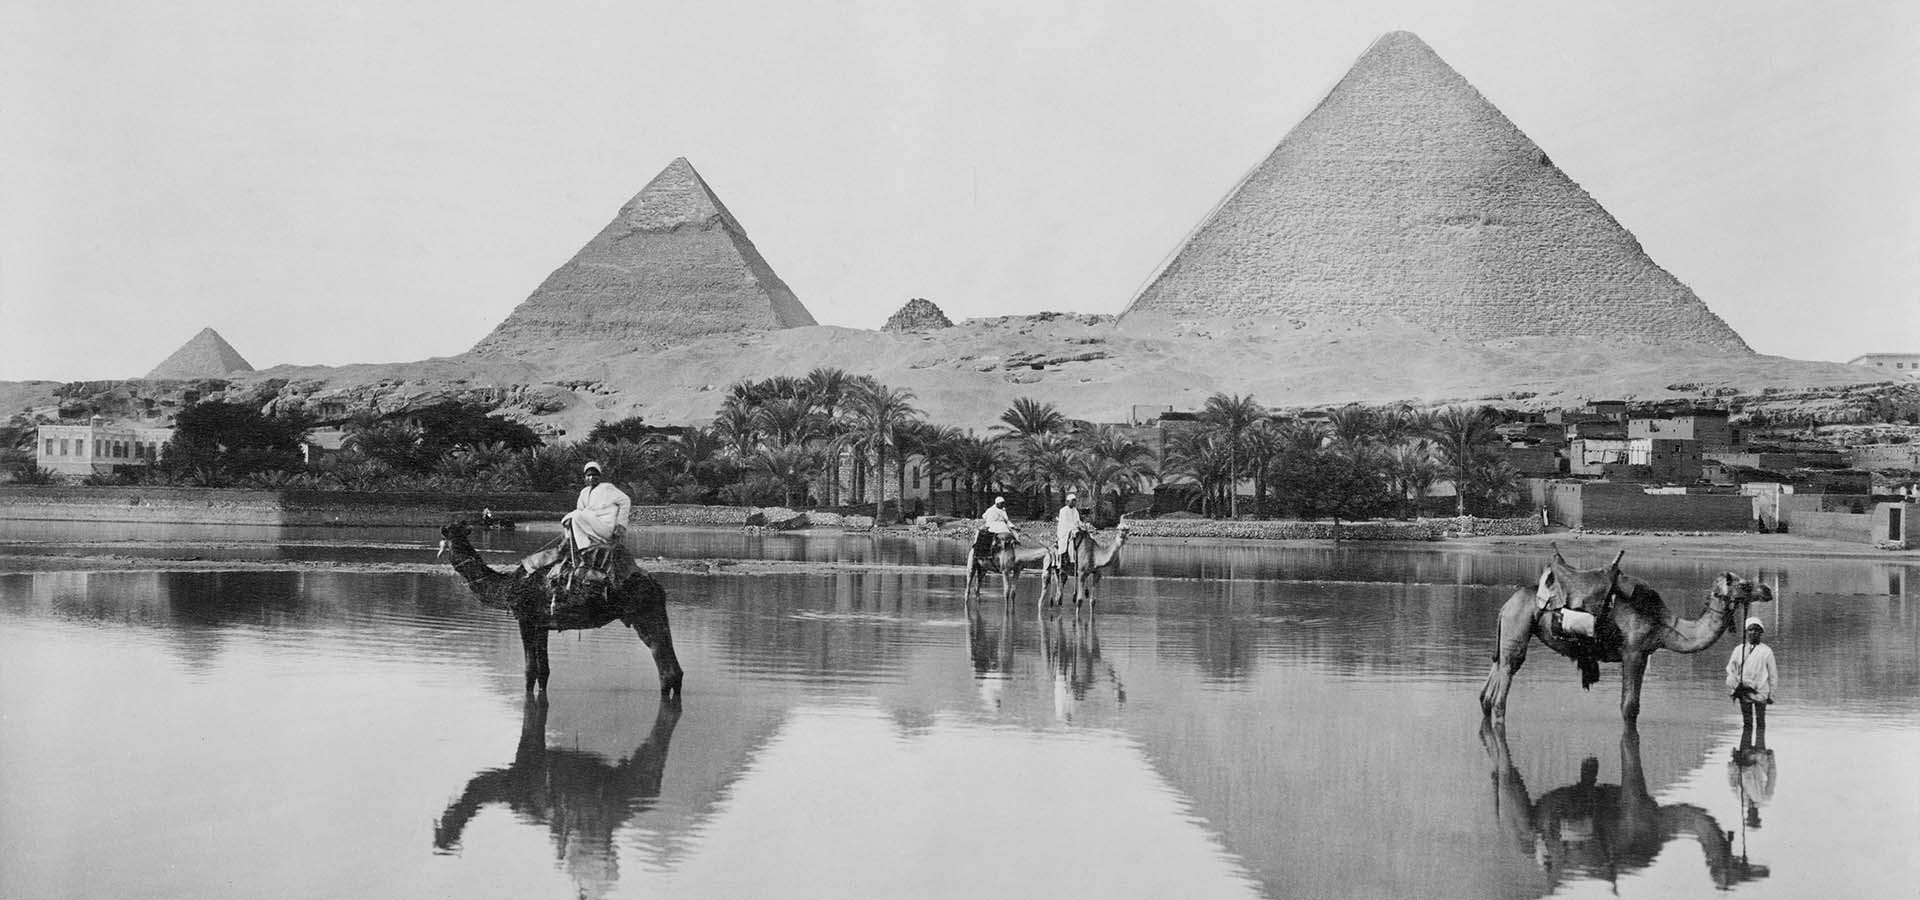 Men and Camels in Shallow Flood Water with Pyramids in Background, Egypt, 1890